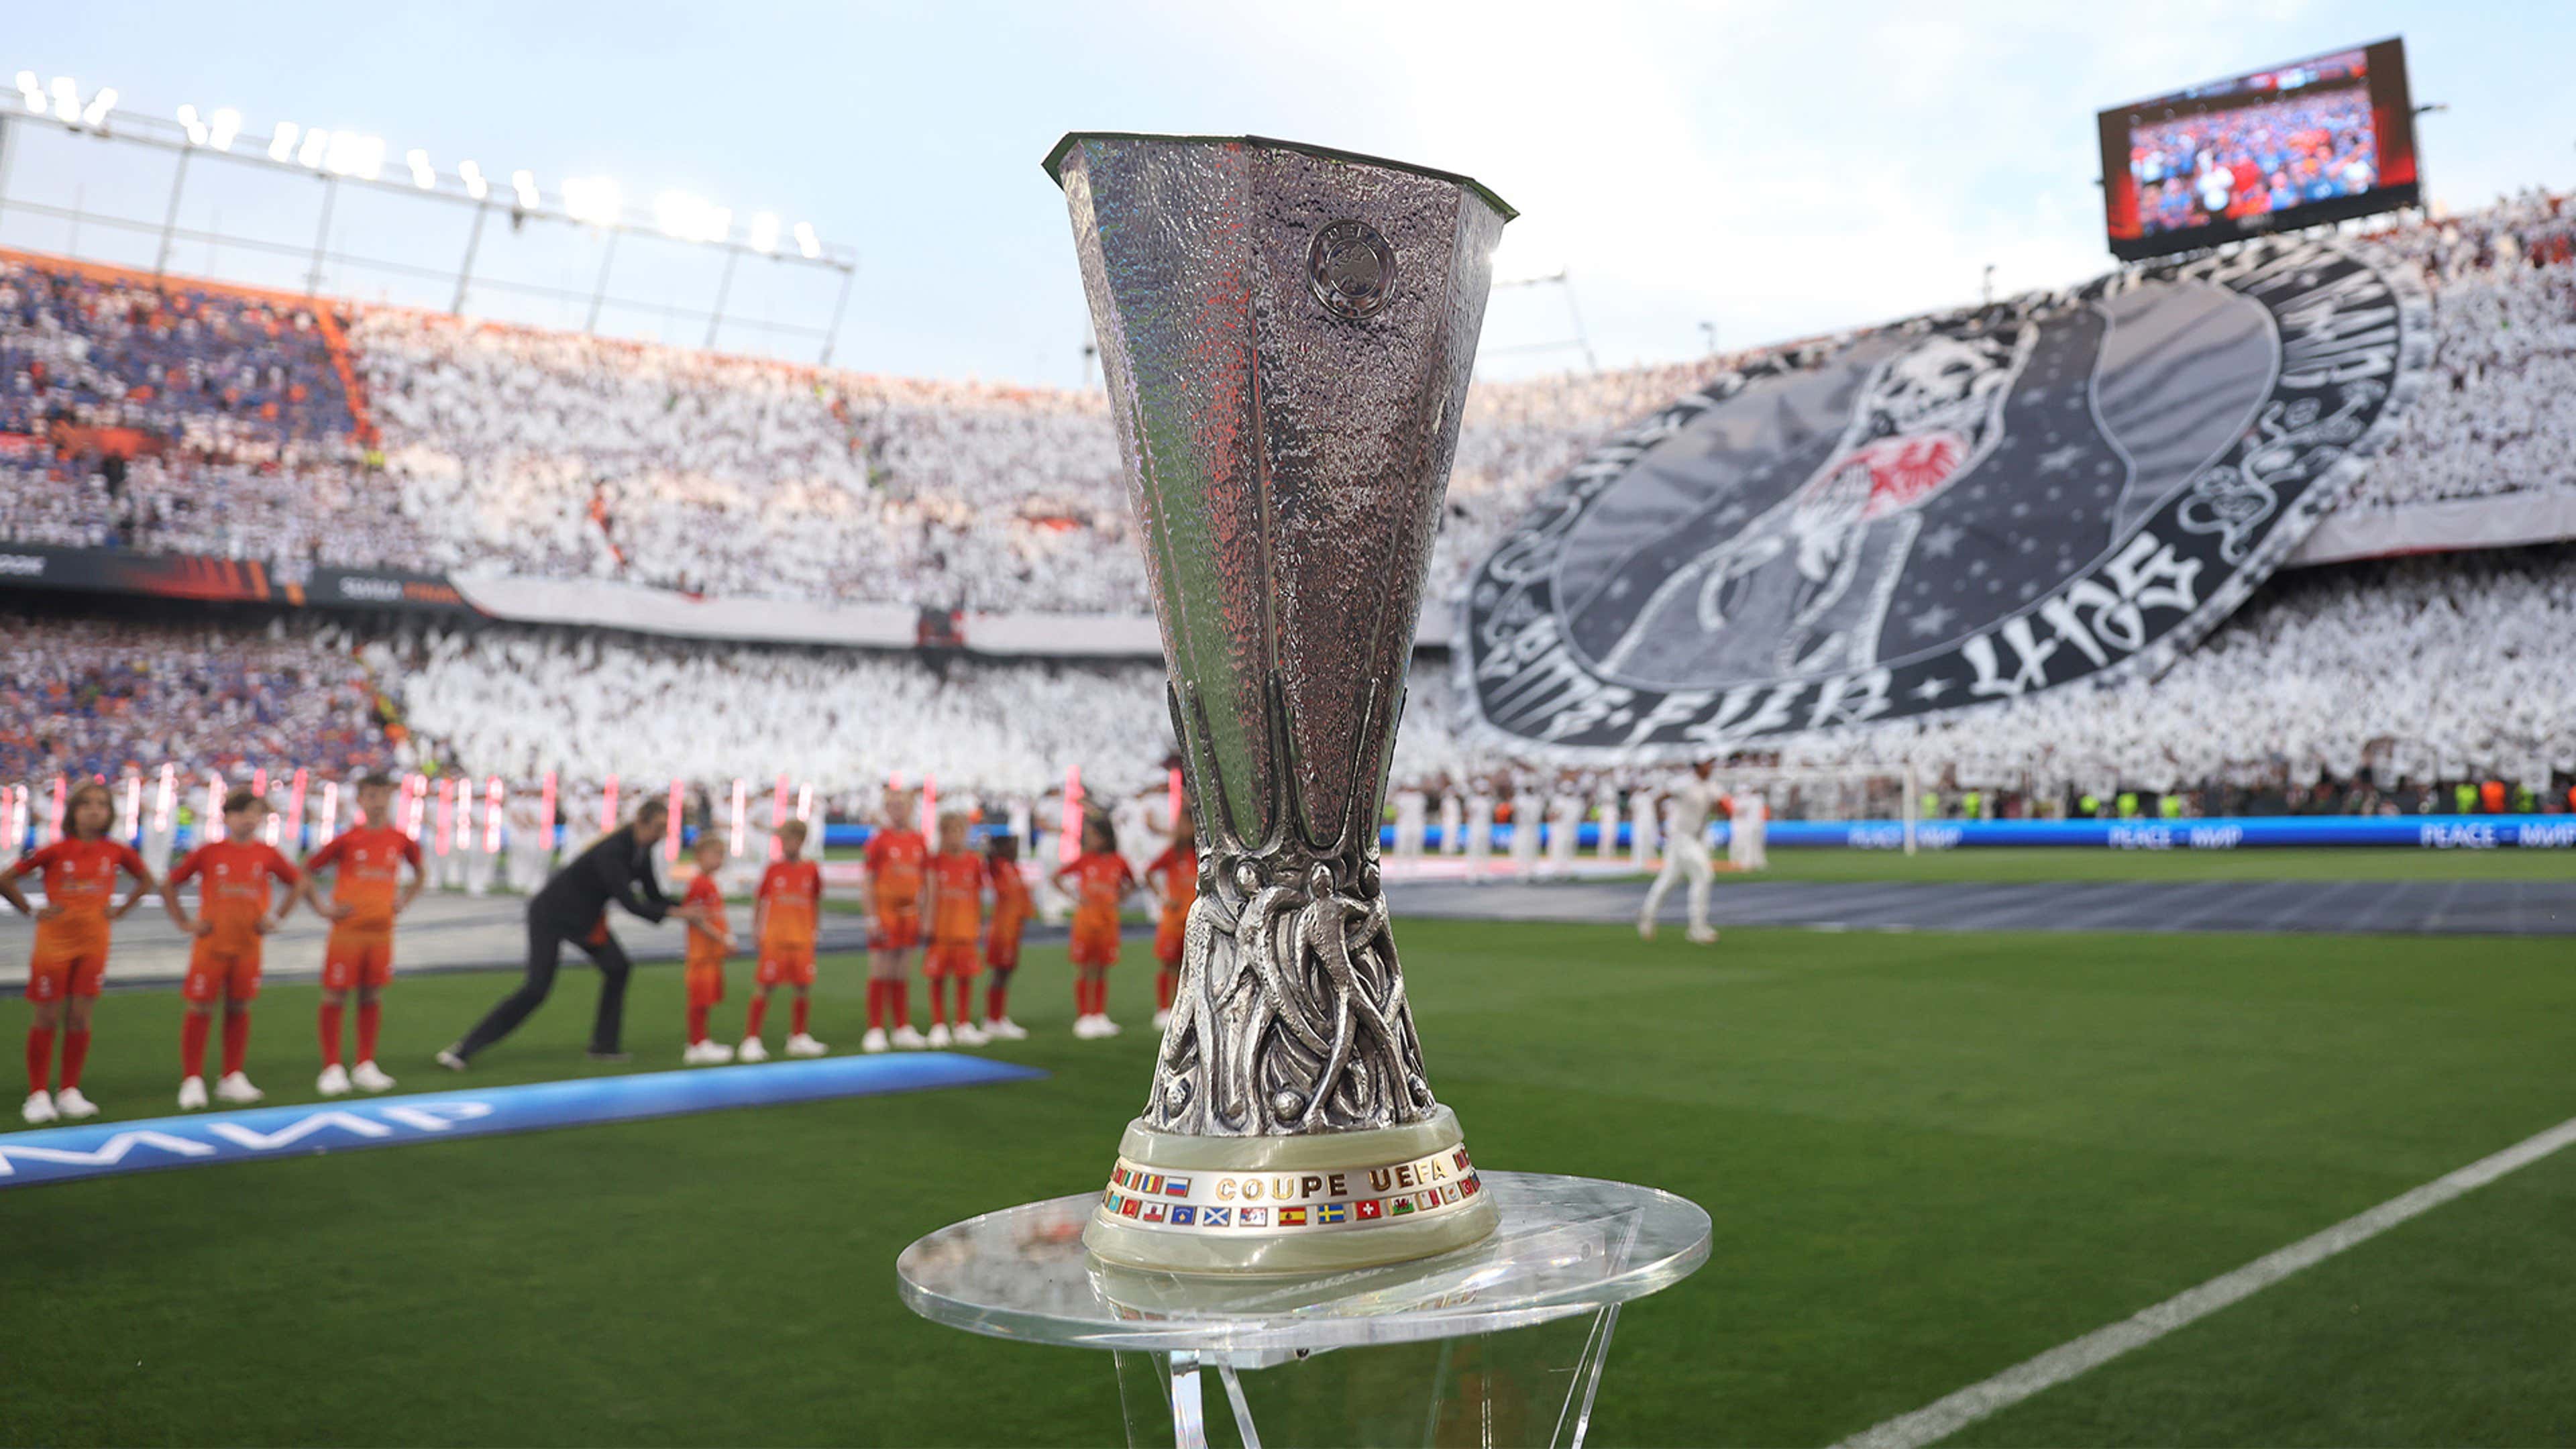 How to Watch UEFA Europa League Streaming Live in the US Today - December 14